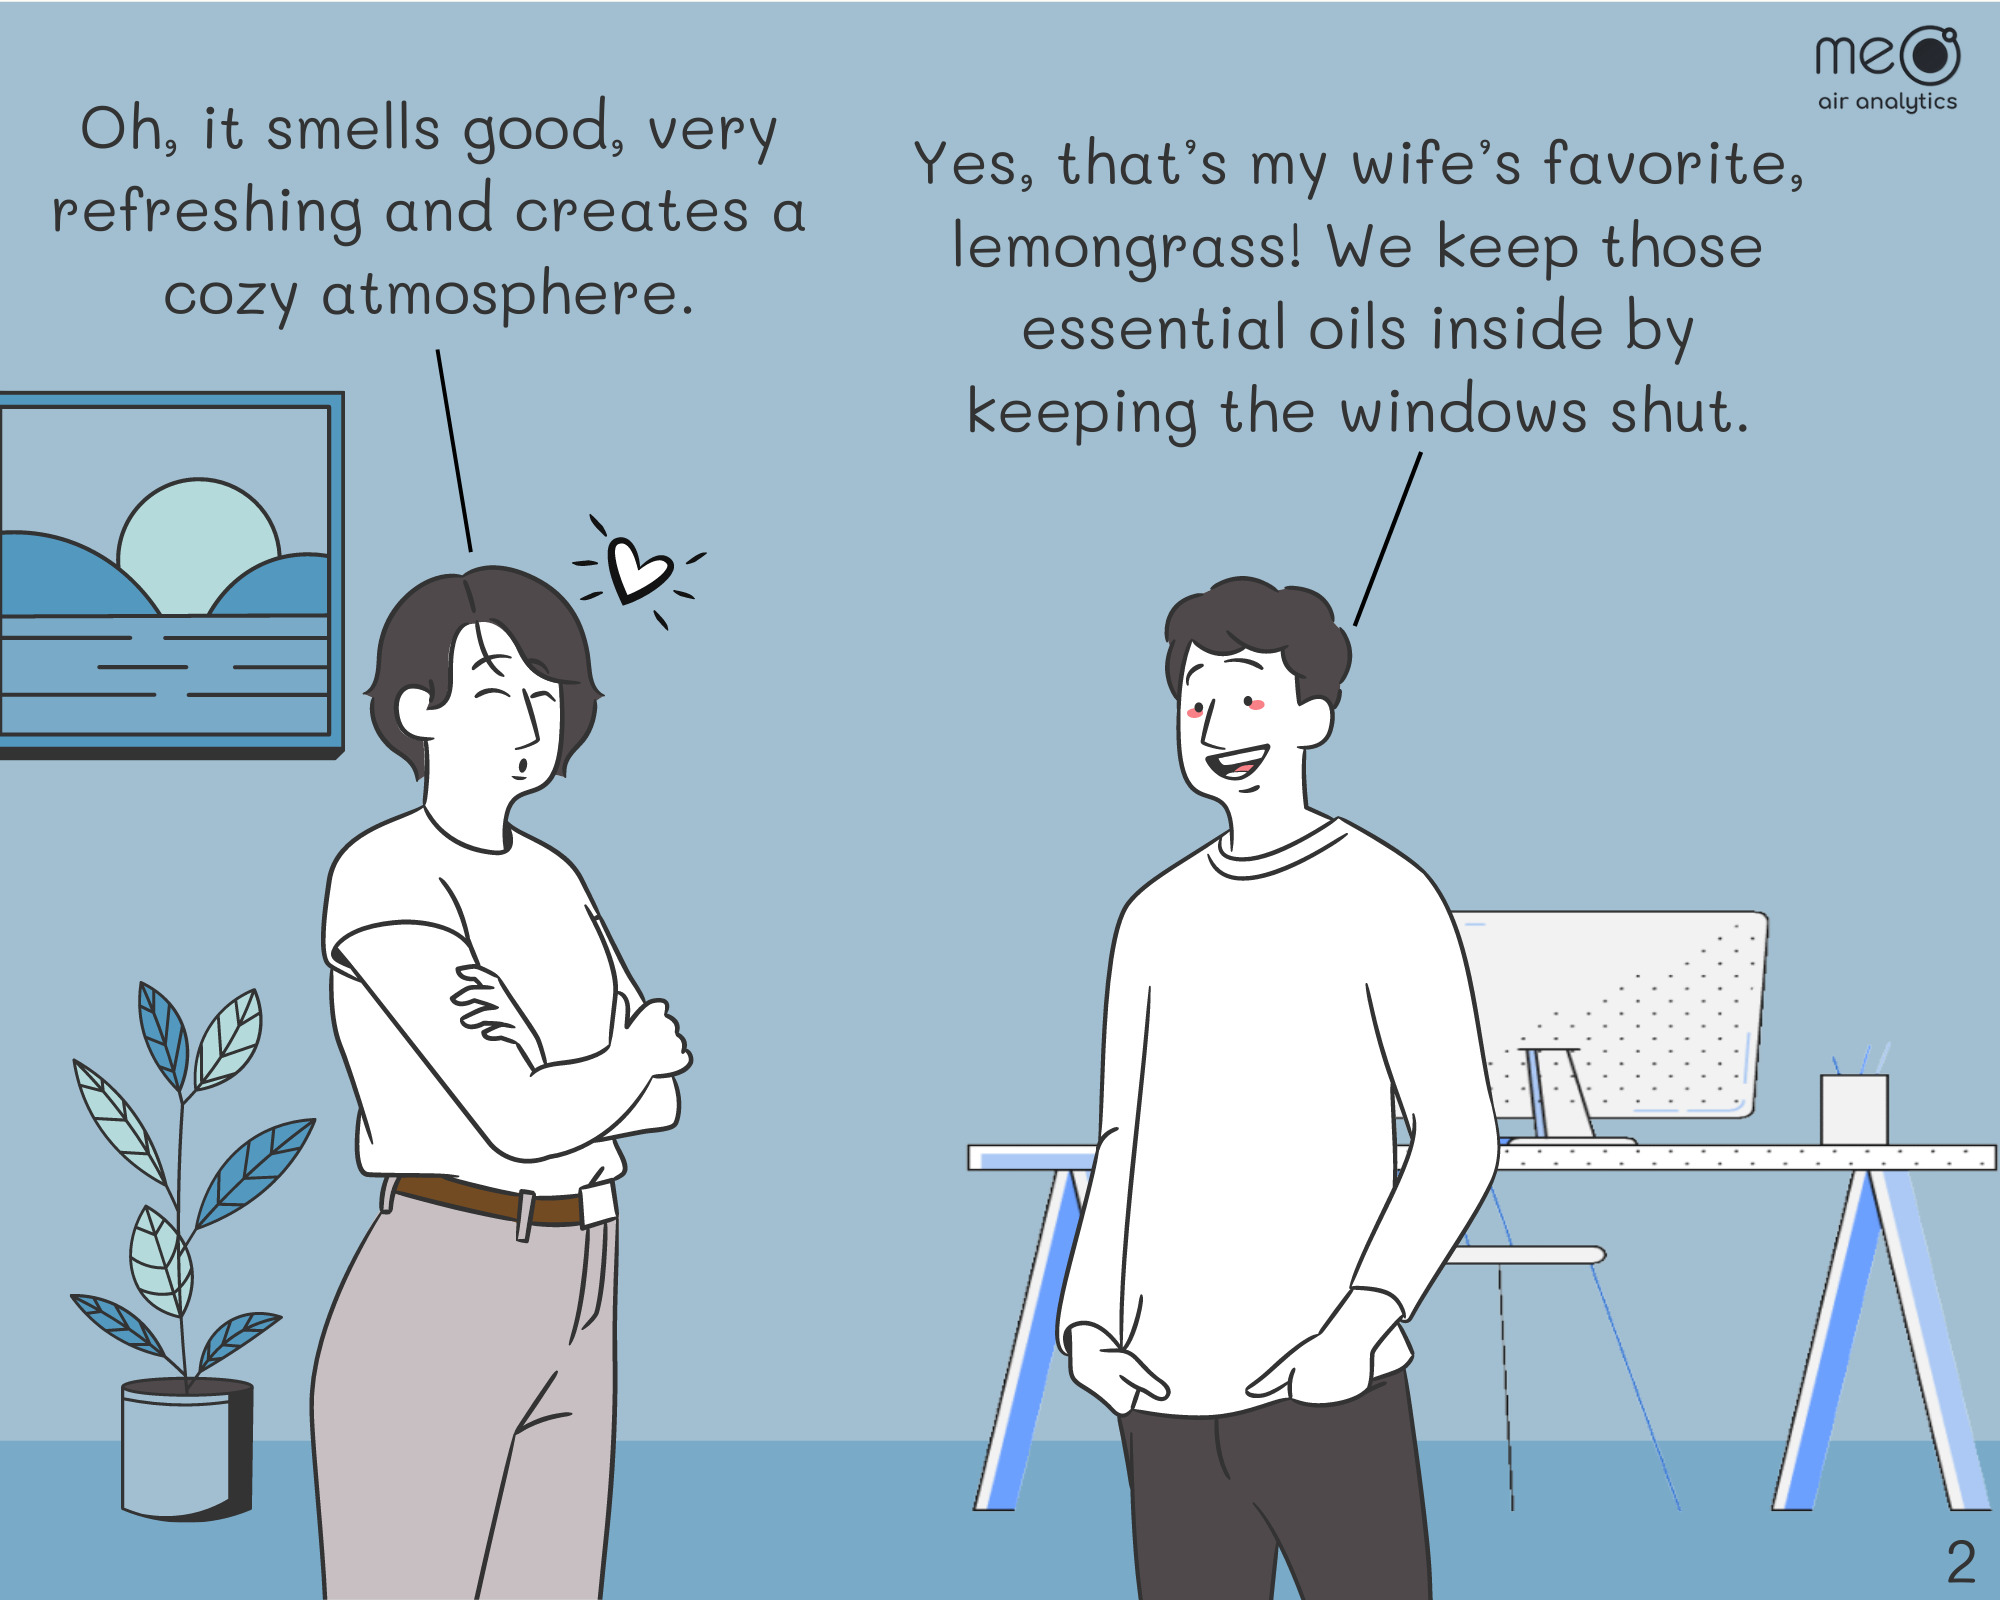 John: Oh, it smells good, very refreshing and creates a cozy atmosphere.
Derek: Yes, that’s my wife’s favorite, lemongrass! You know, in winter we seldom open the windows to avoid losing the heat. Those essential oils bring a nice feeling inside.